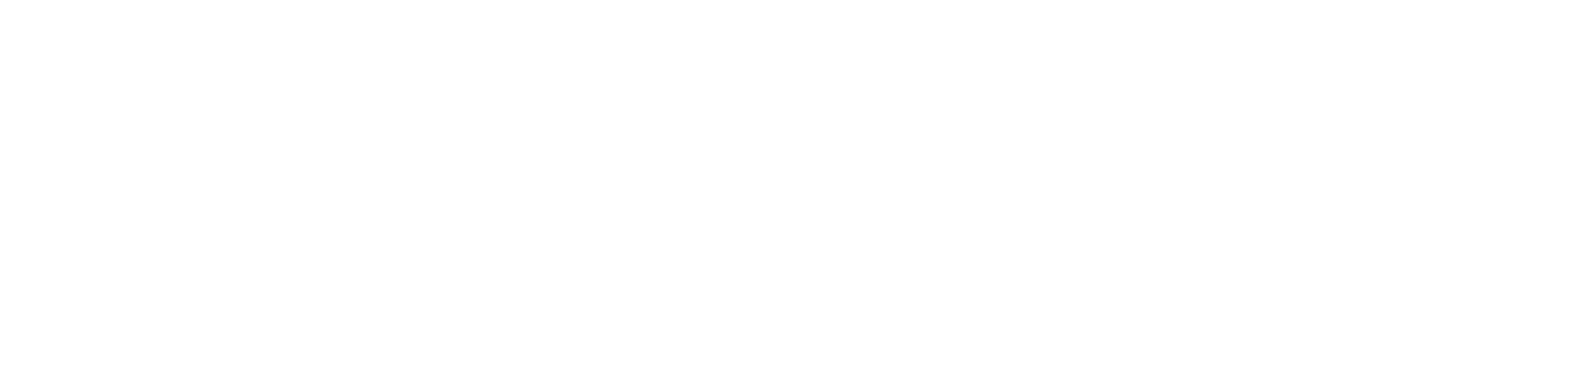 Staples Business Advantage Logo - Staples Logo Png (image in Collection)